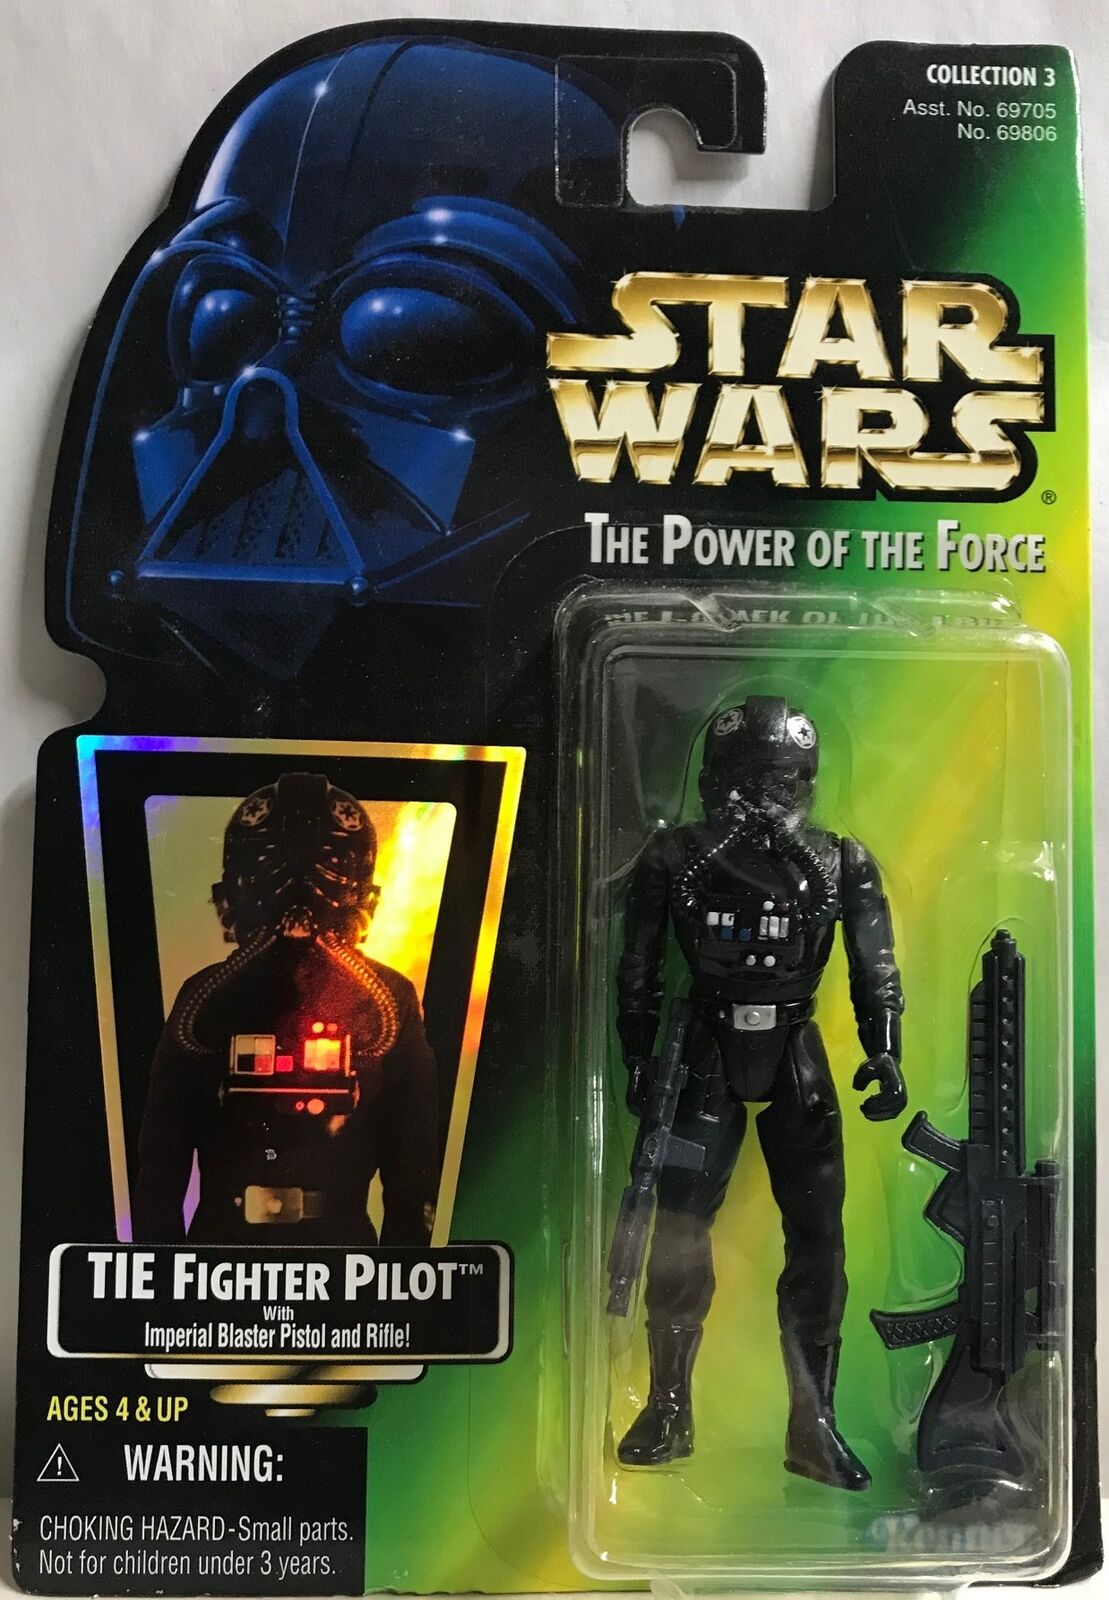 STAR WARS - KENNER - POTF - TIE FIGHTER PILOT - with Imperial Blaster Pistol and Rifle